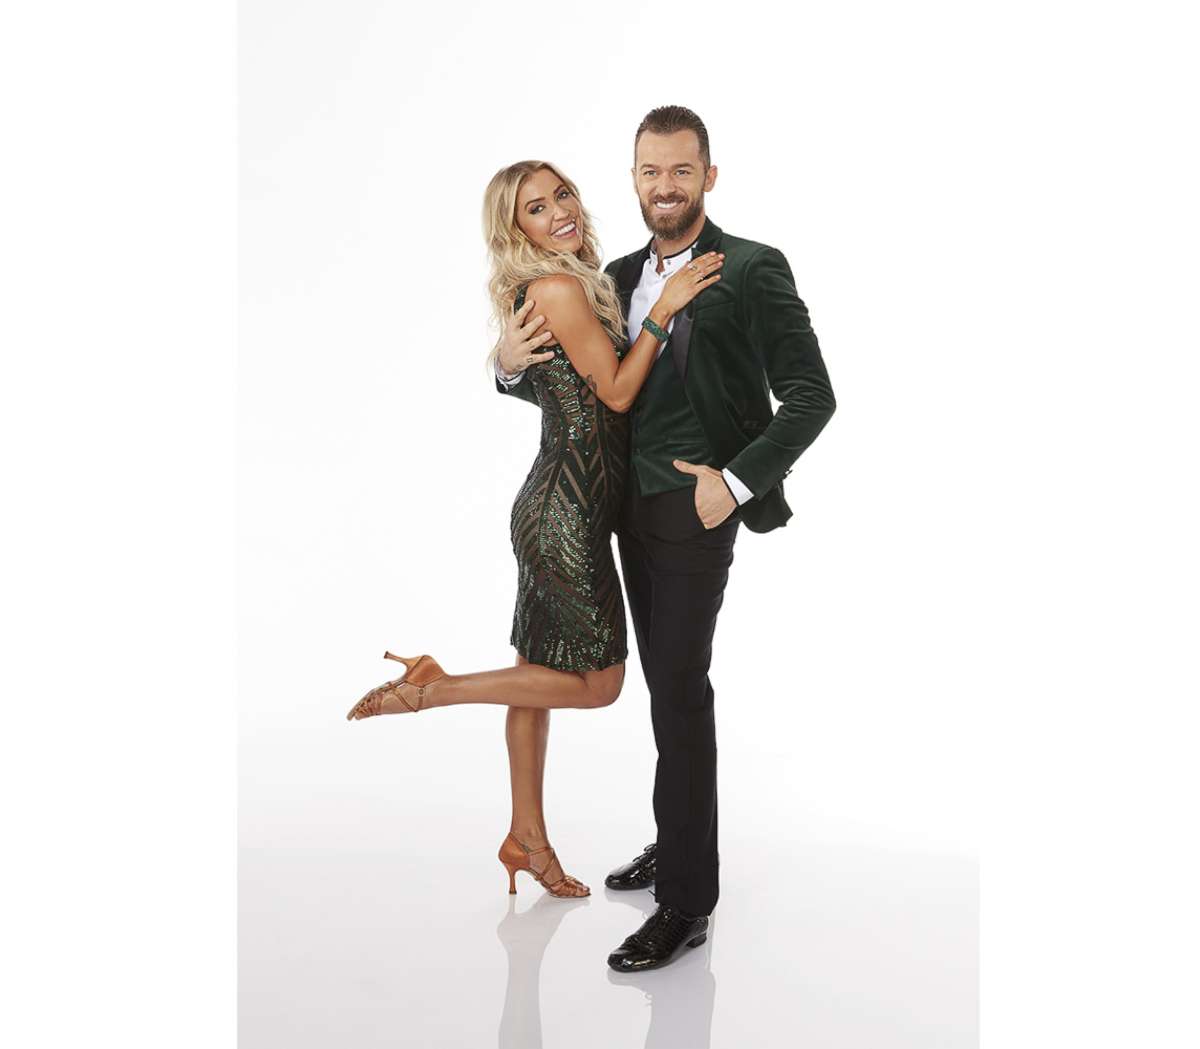 PHOTO: "Dancing with the Stars" stars Kaitlyn Bristowe and Artem Chigvintsev.